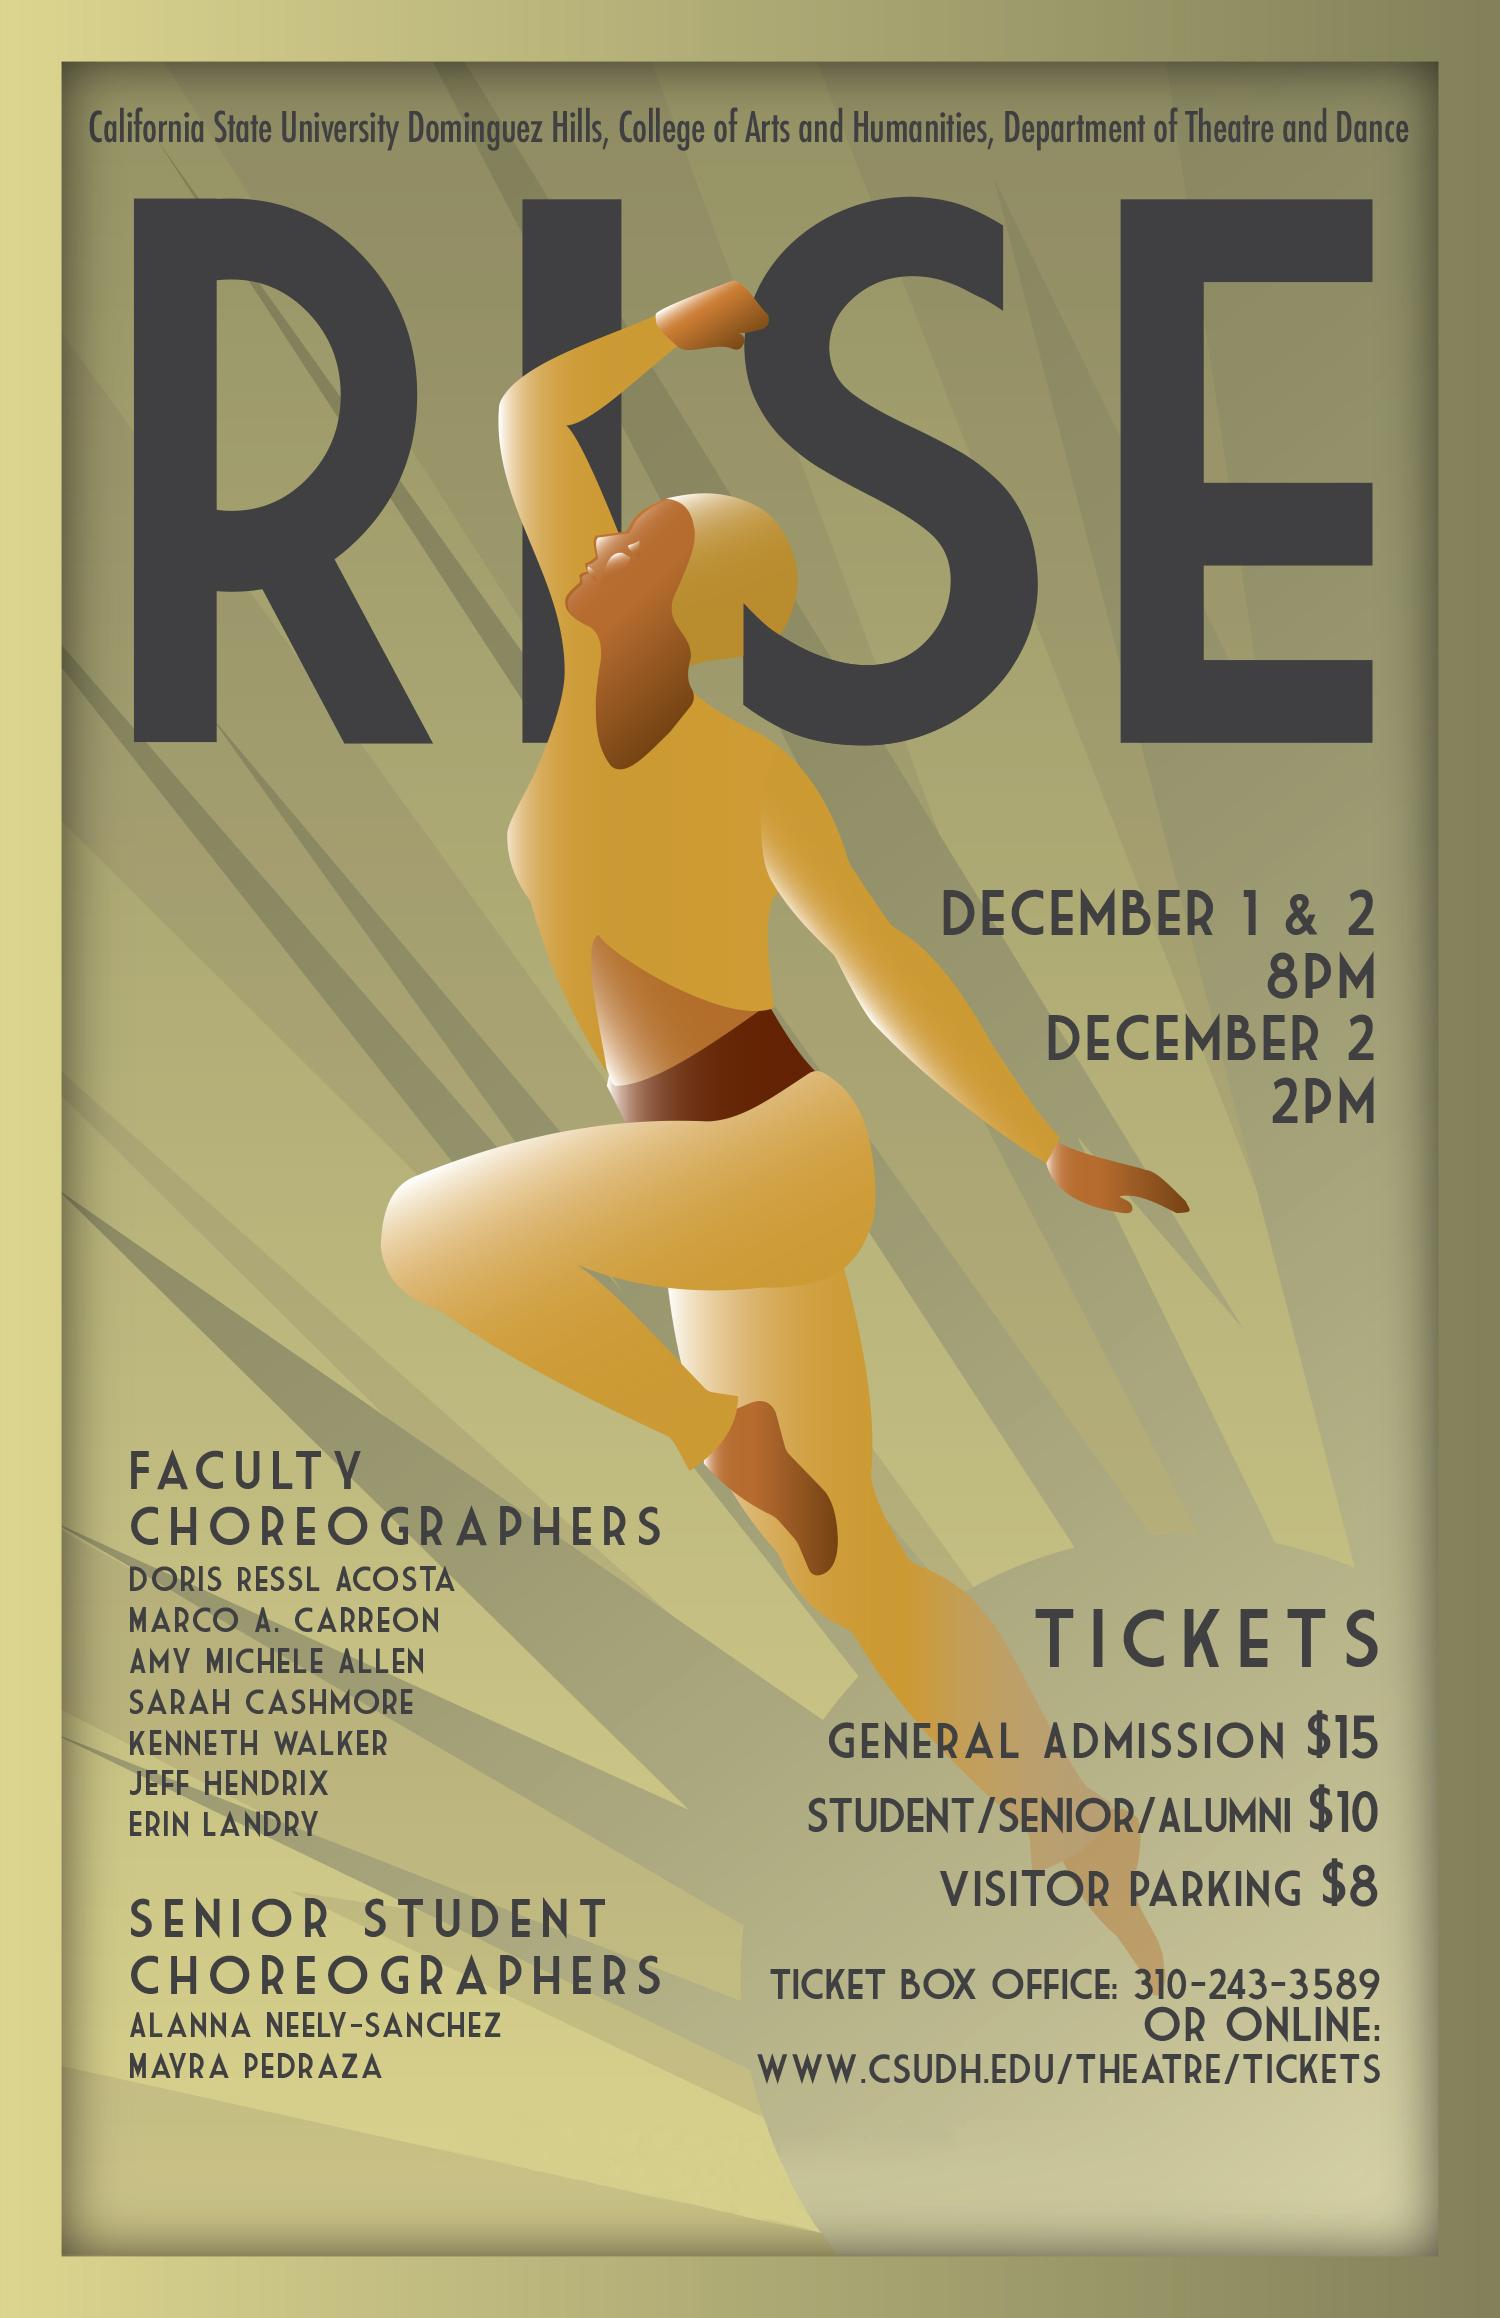 RISE - Department of Theatre and Dance fall Dance Concert